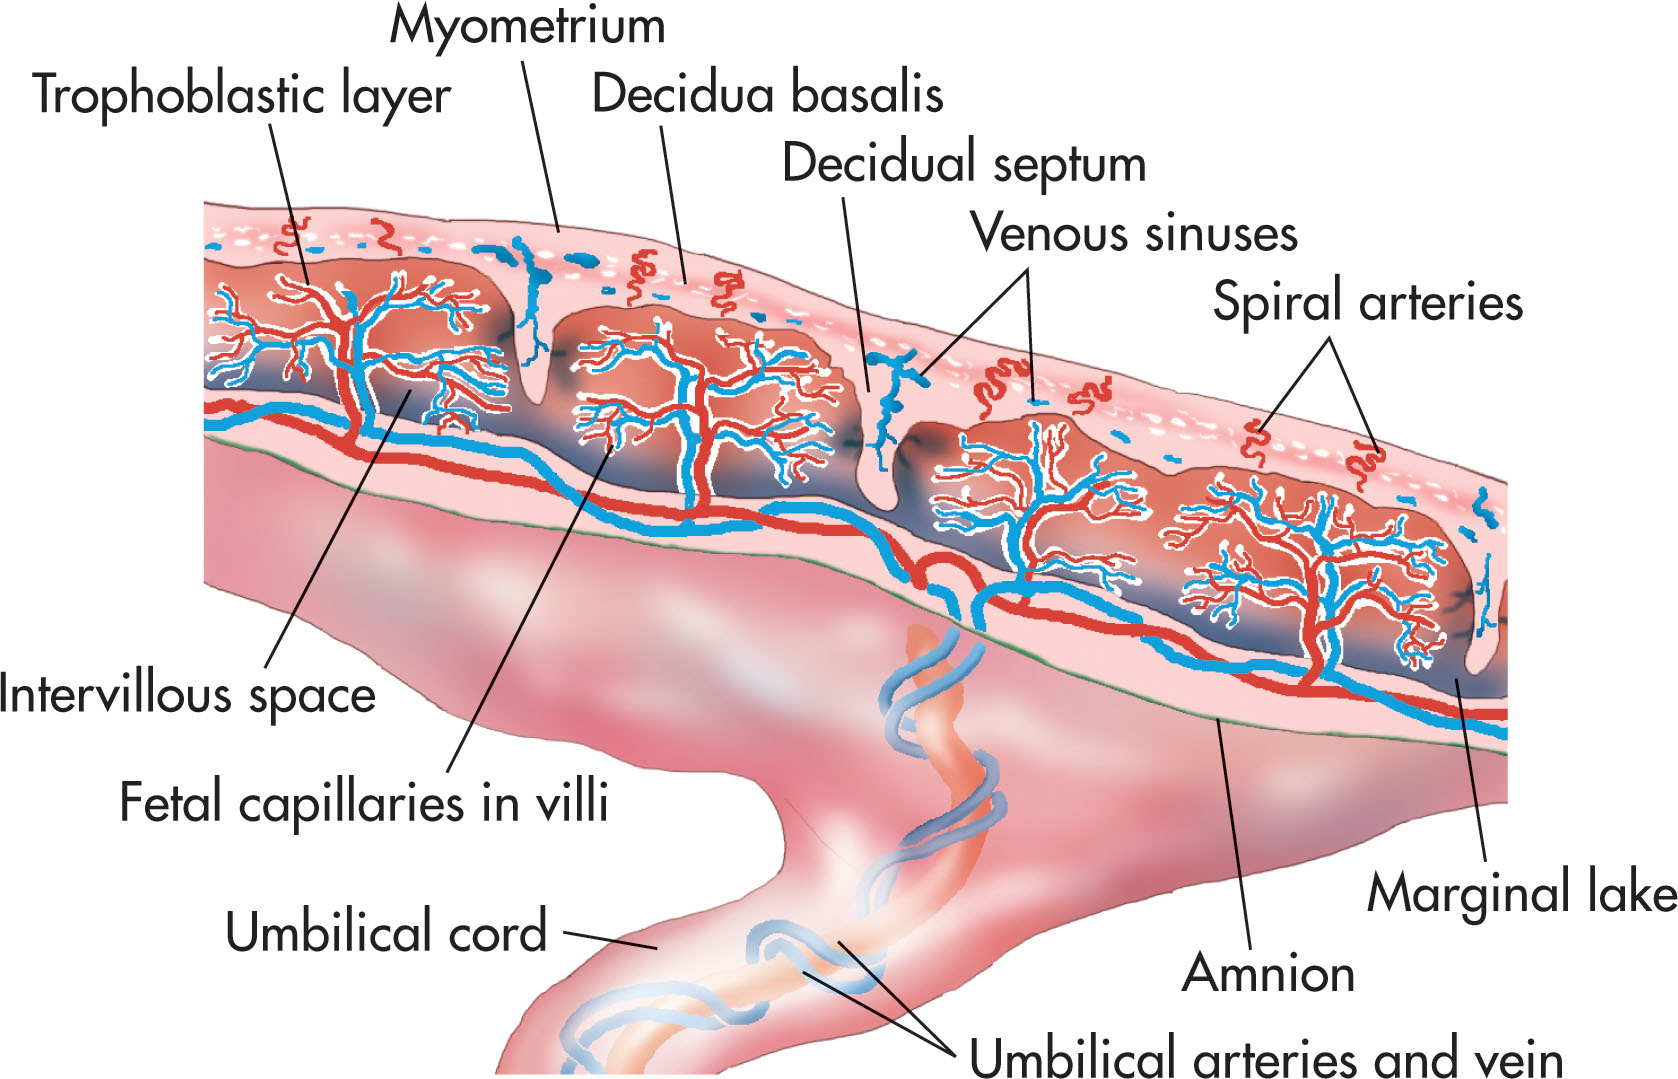 Fig. 56.2, The major functioning unit of the placenta is the chorionic villus. The spiral arteries, venous sinuses, and uterine arteries line the periphery of the placenta.